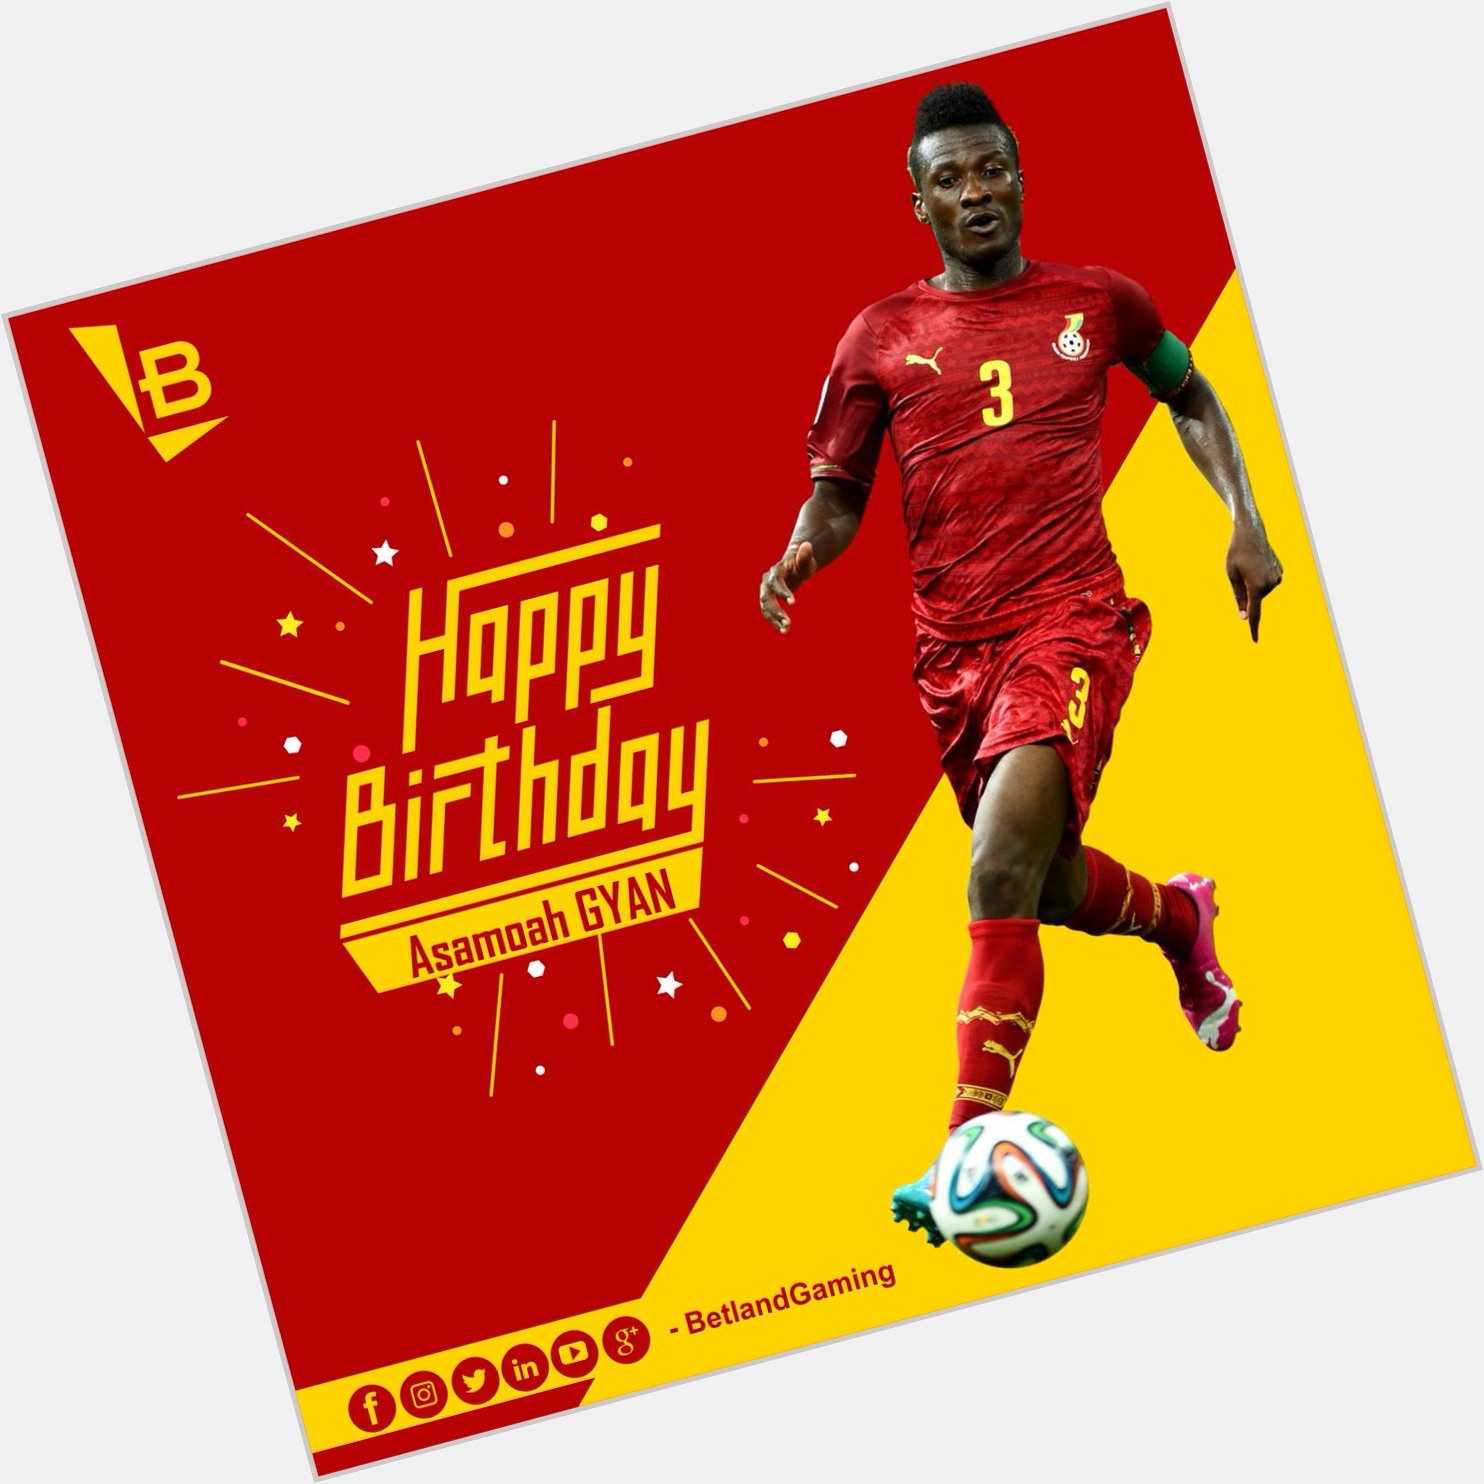 Happy 32nd Birthday, Asamoah Gyan

Africa\s All-time topscorer at the World Cup 